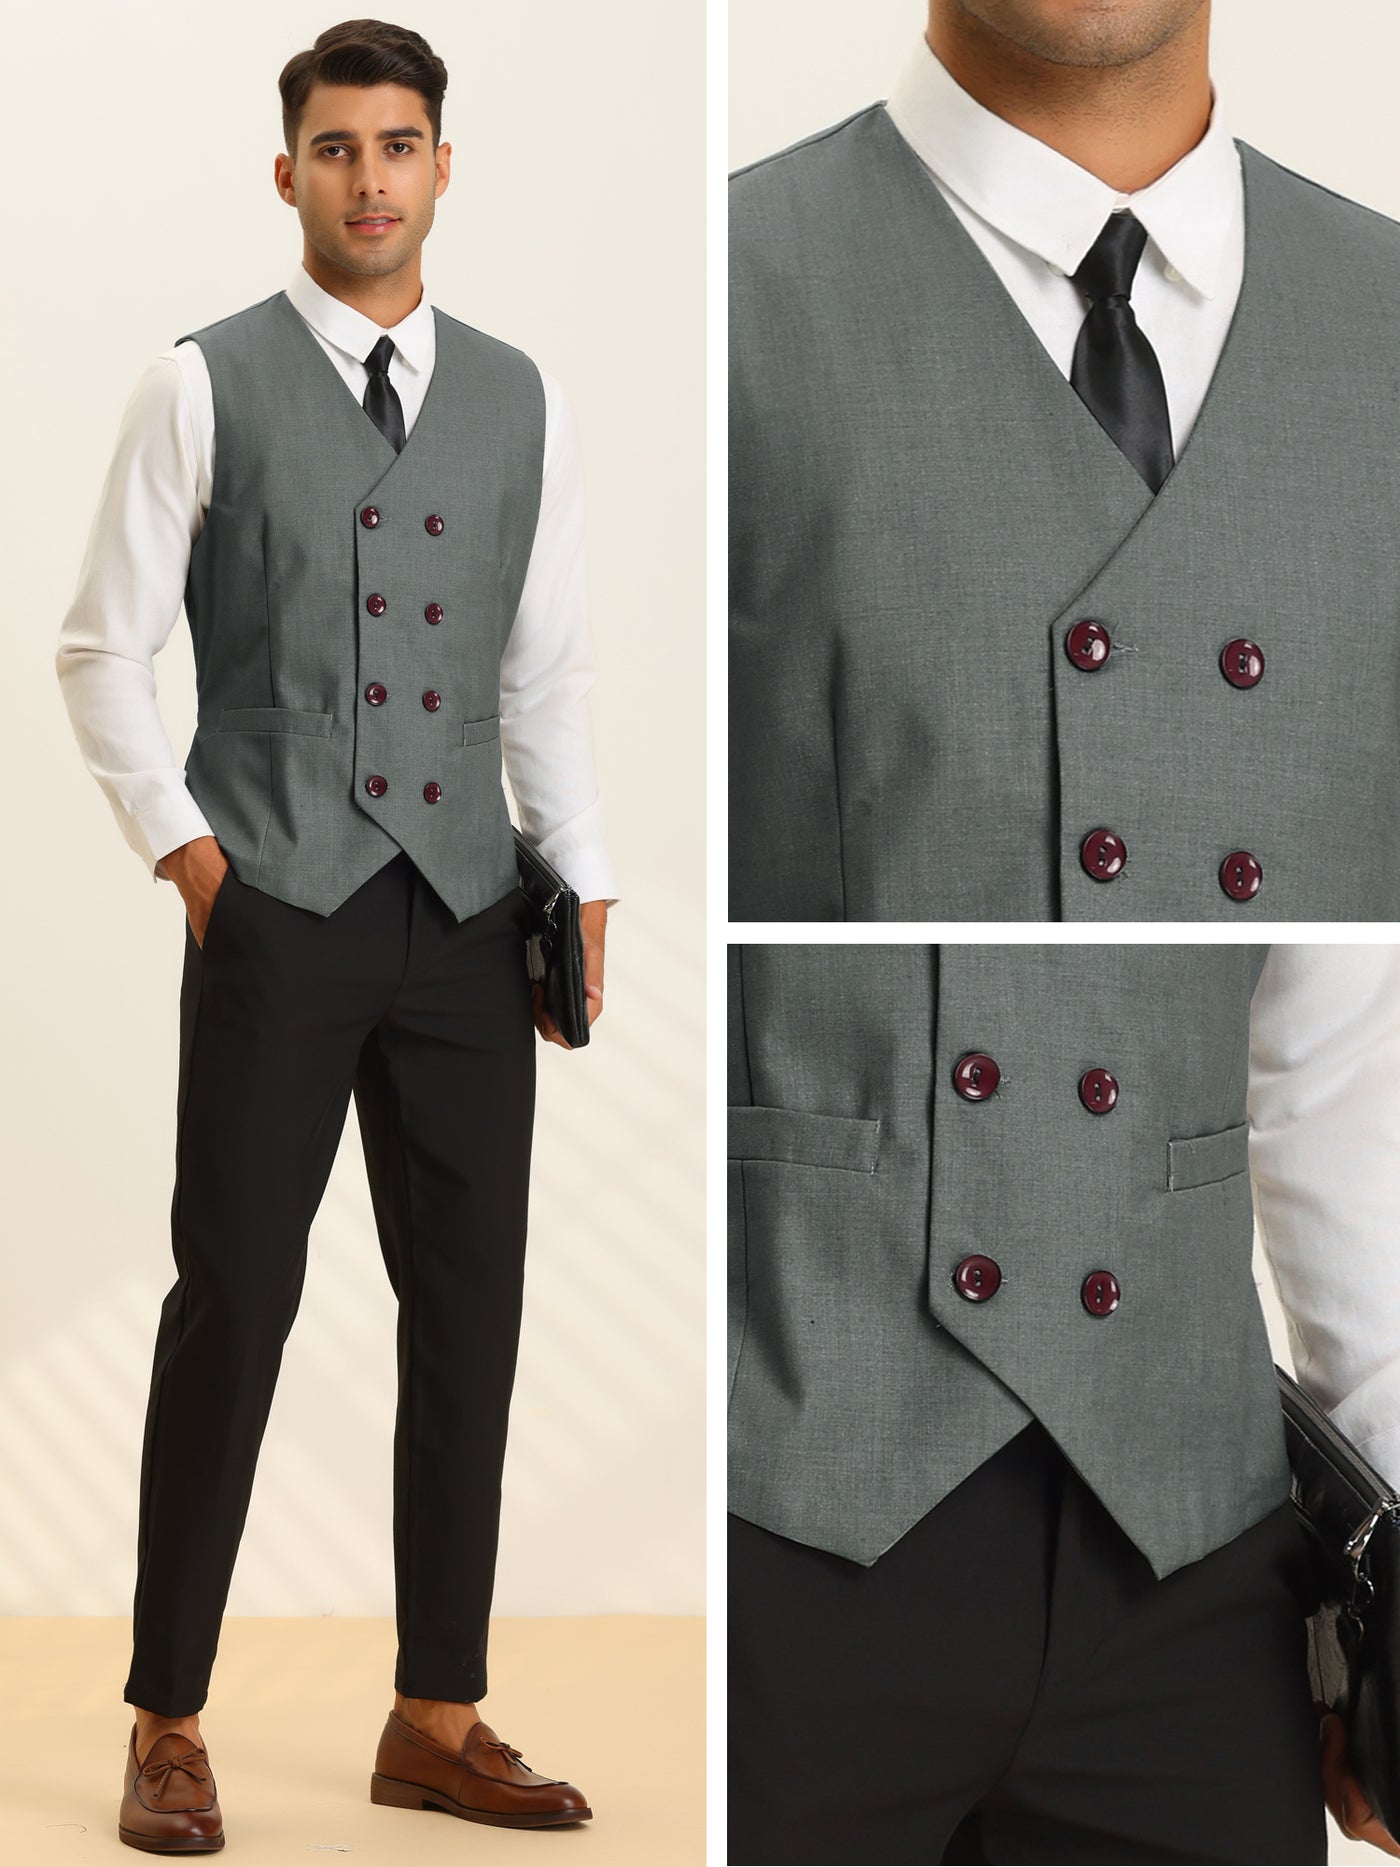 Bublédon Men's Suits Vest V-Neck Sleeveless Double Breasted Business Waistcoat